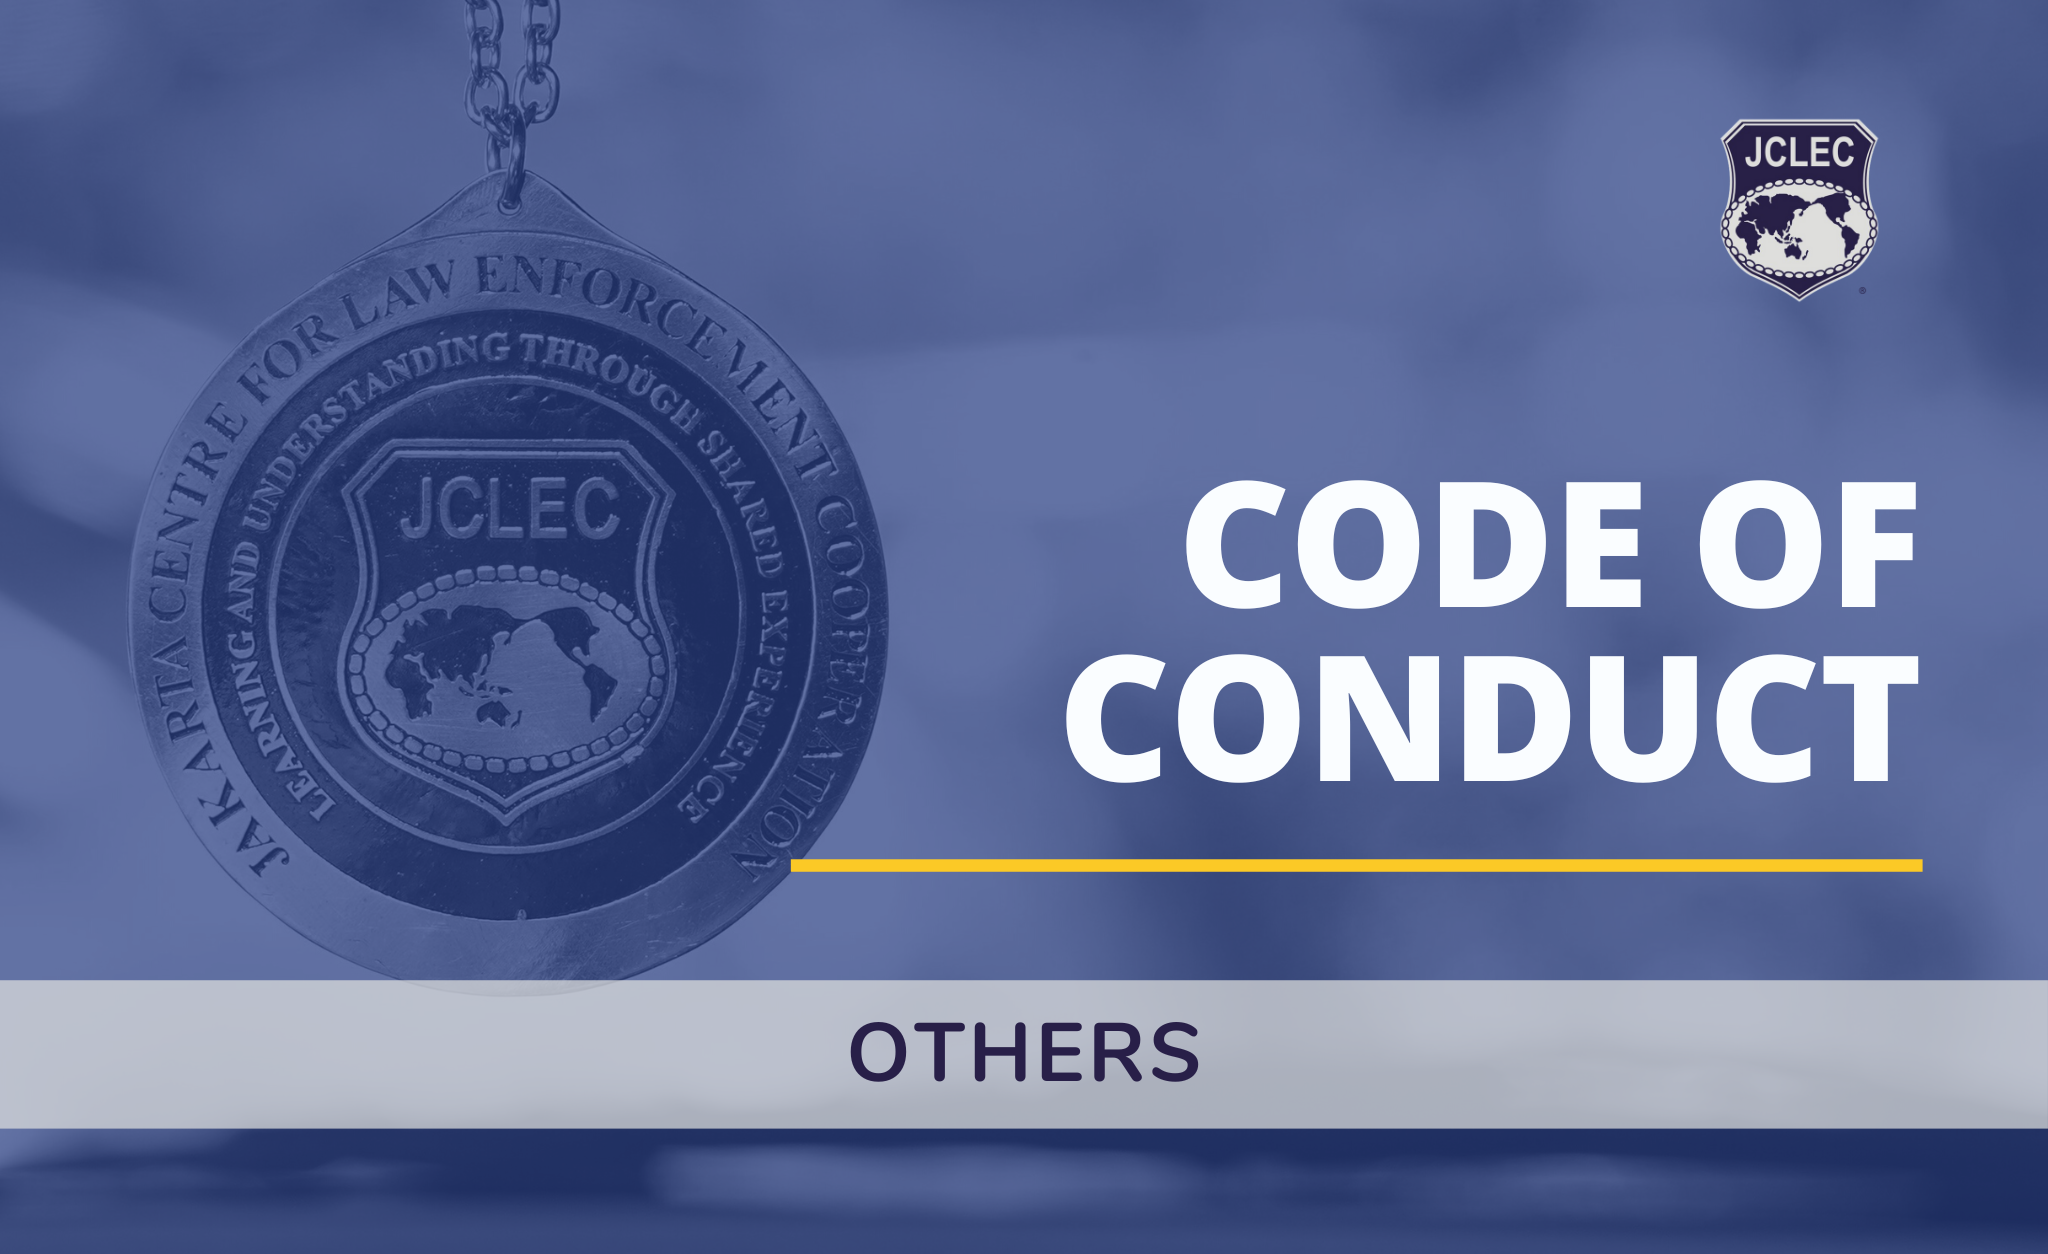 JCLEC Code of Conduct Training